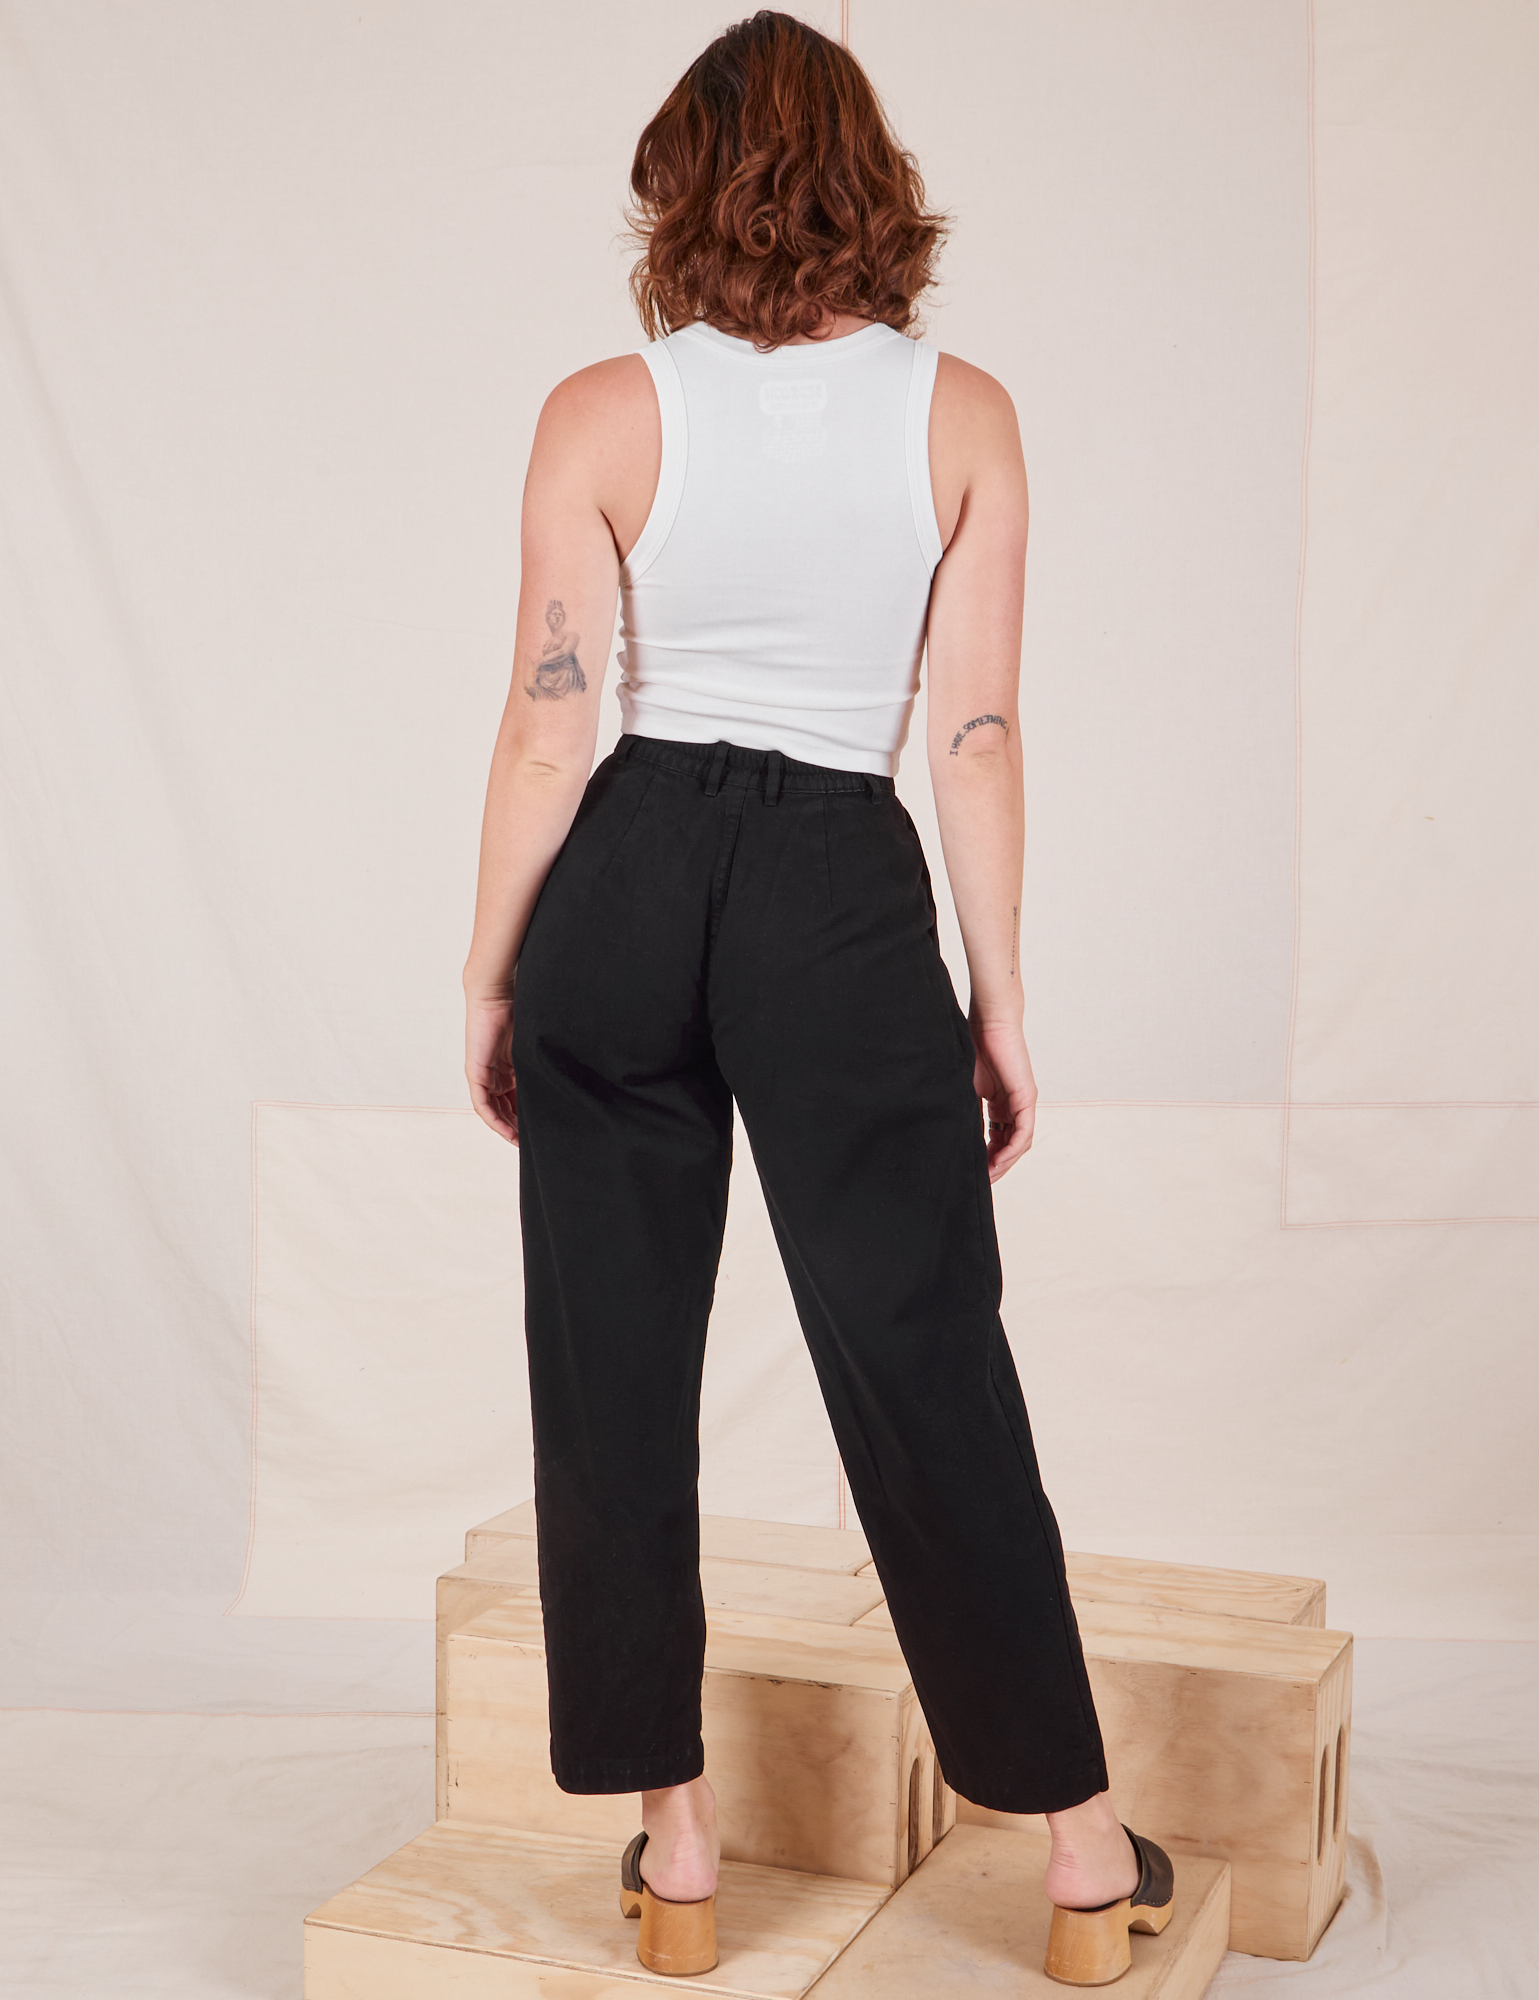 Back view of Heavyweight Trousers in Basic Black and Cropped Tank Top in vintage tee off-white worn by Alex.